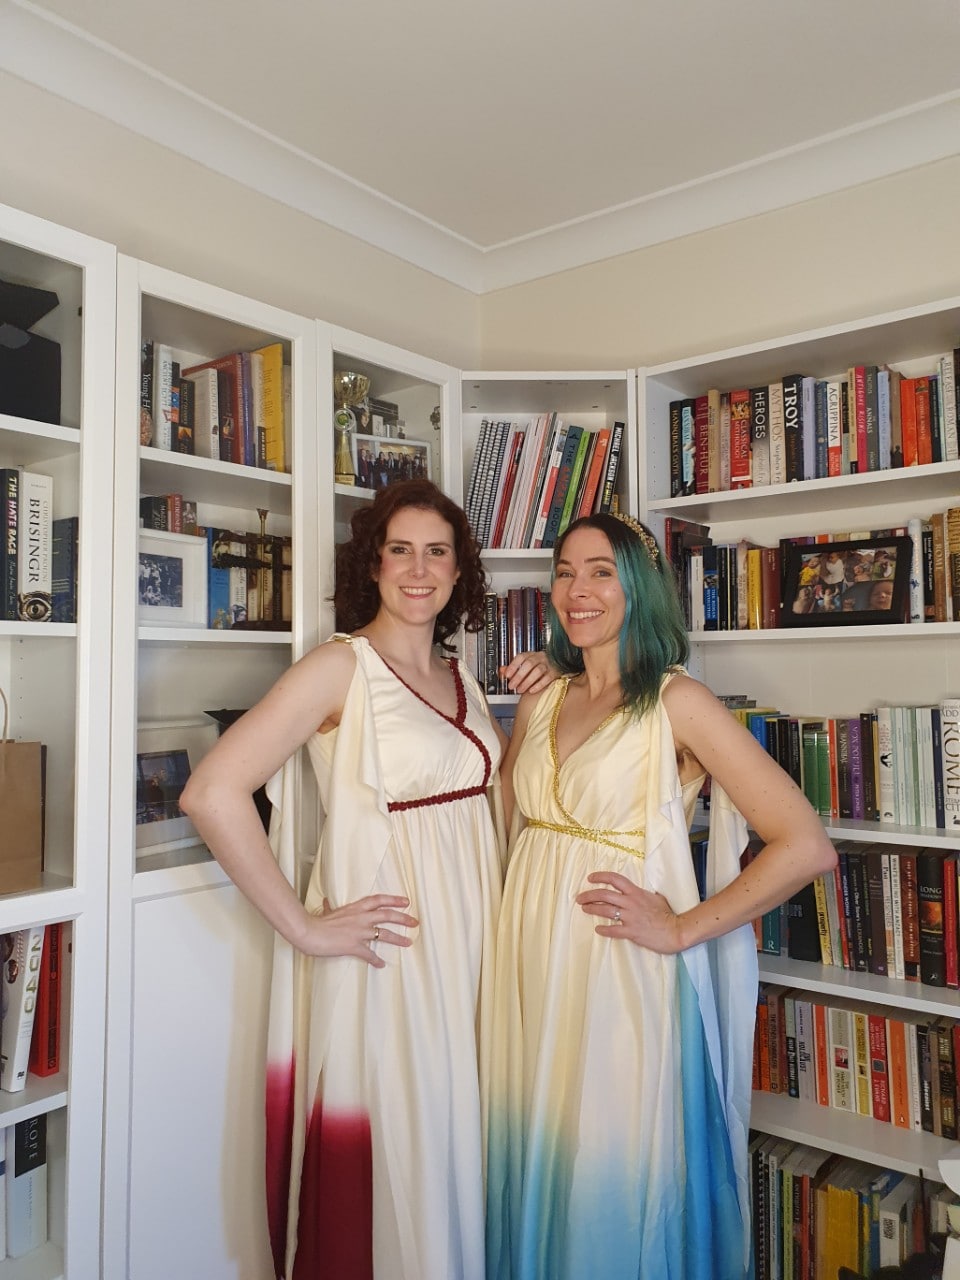 Dr Peta Greenfield and Dr Fiona Radford standing in front of book shelf